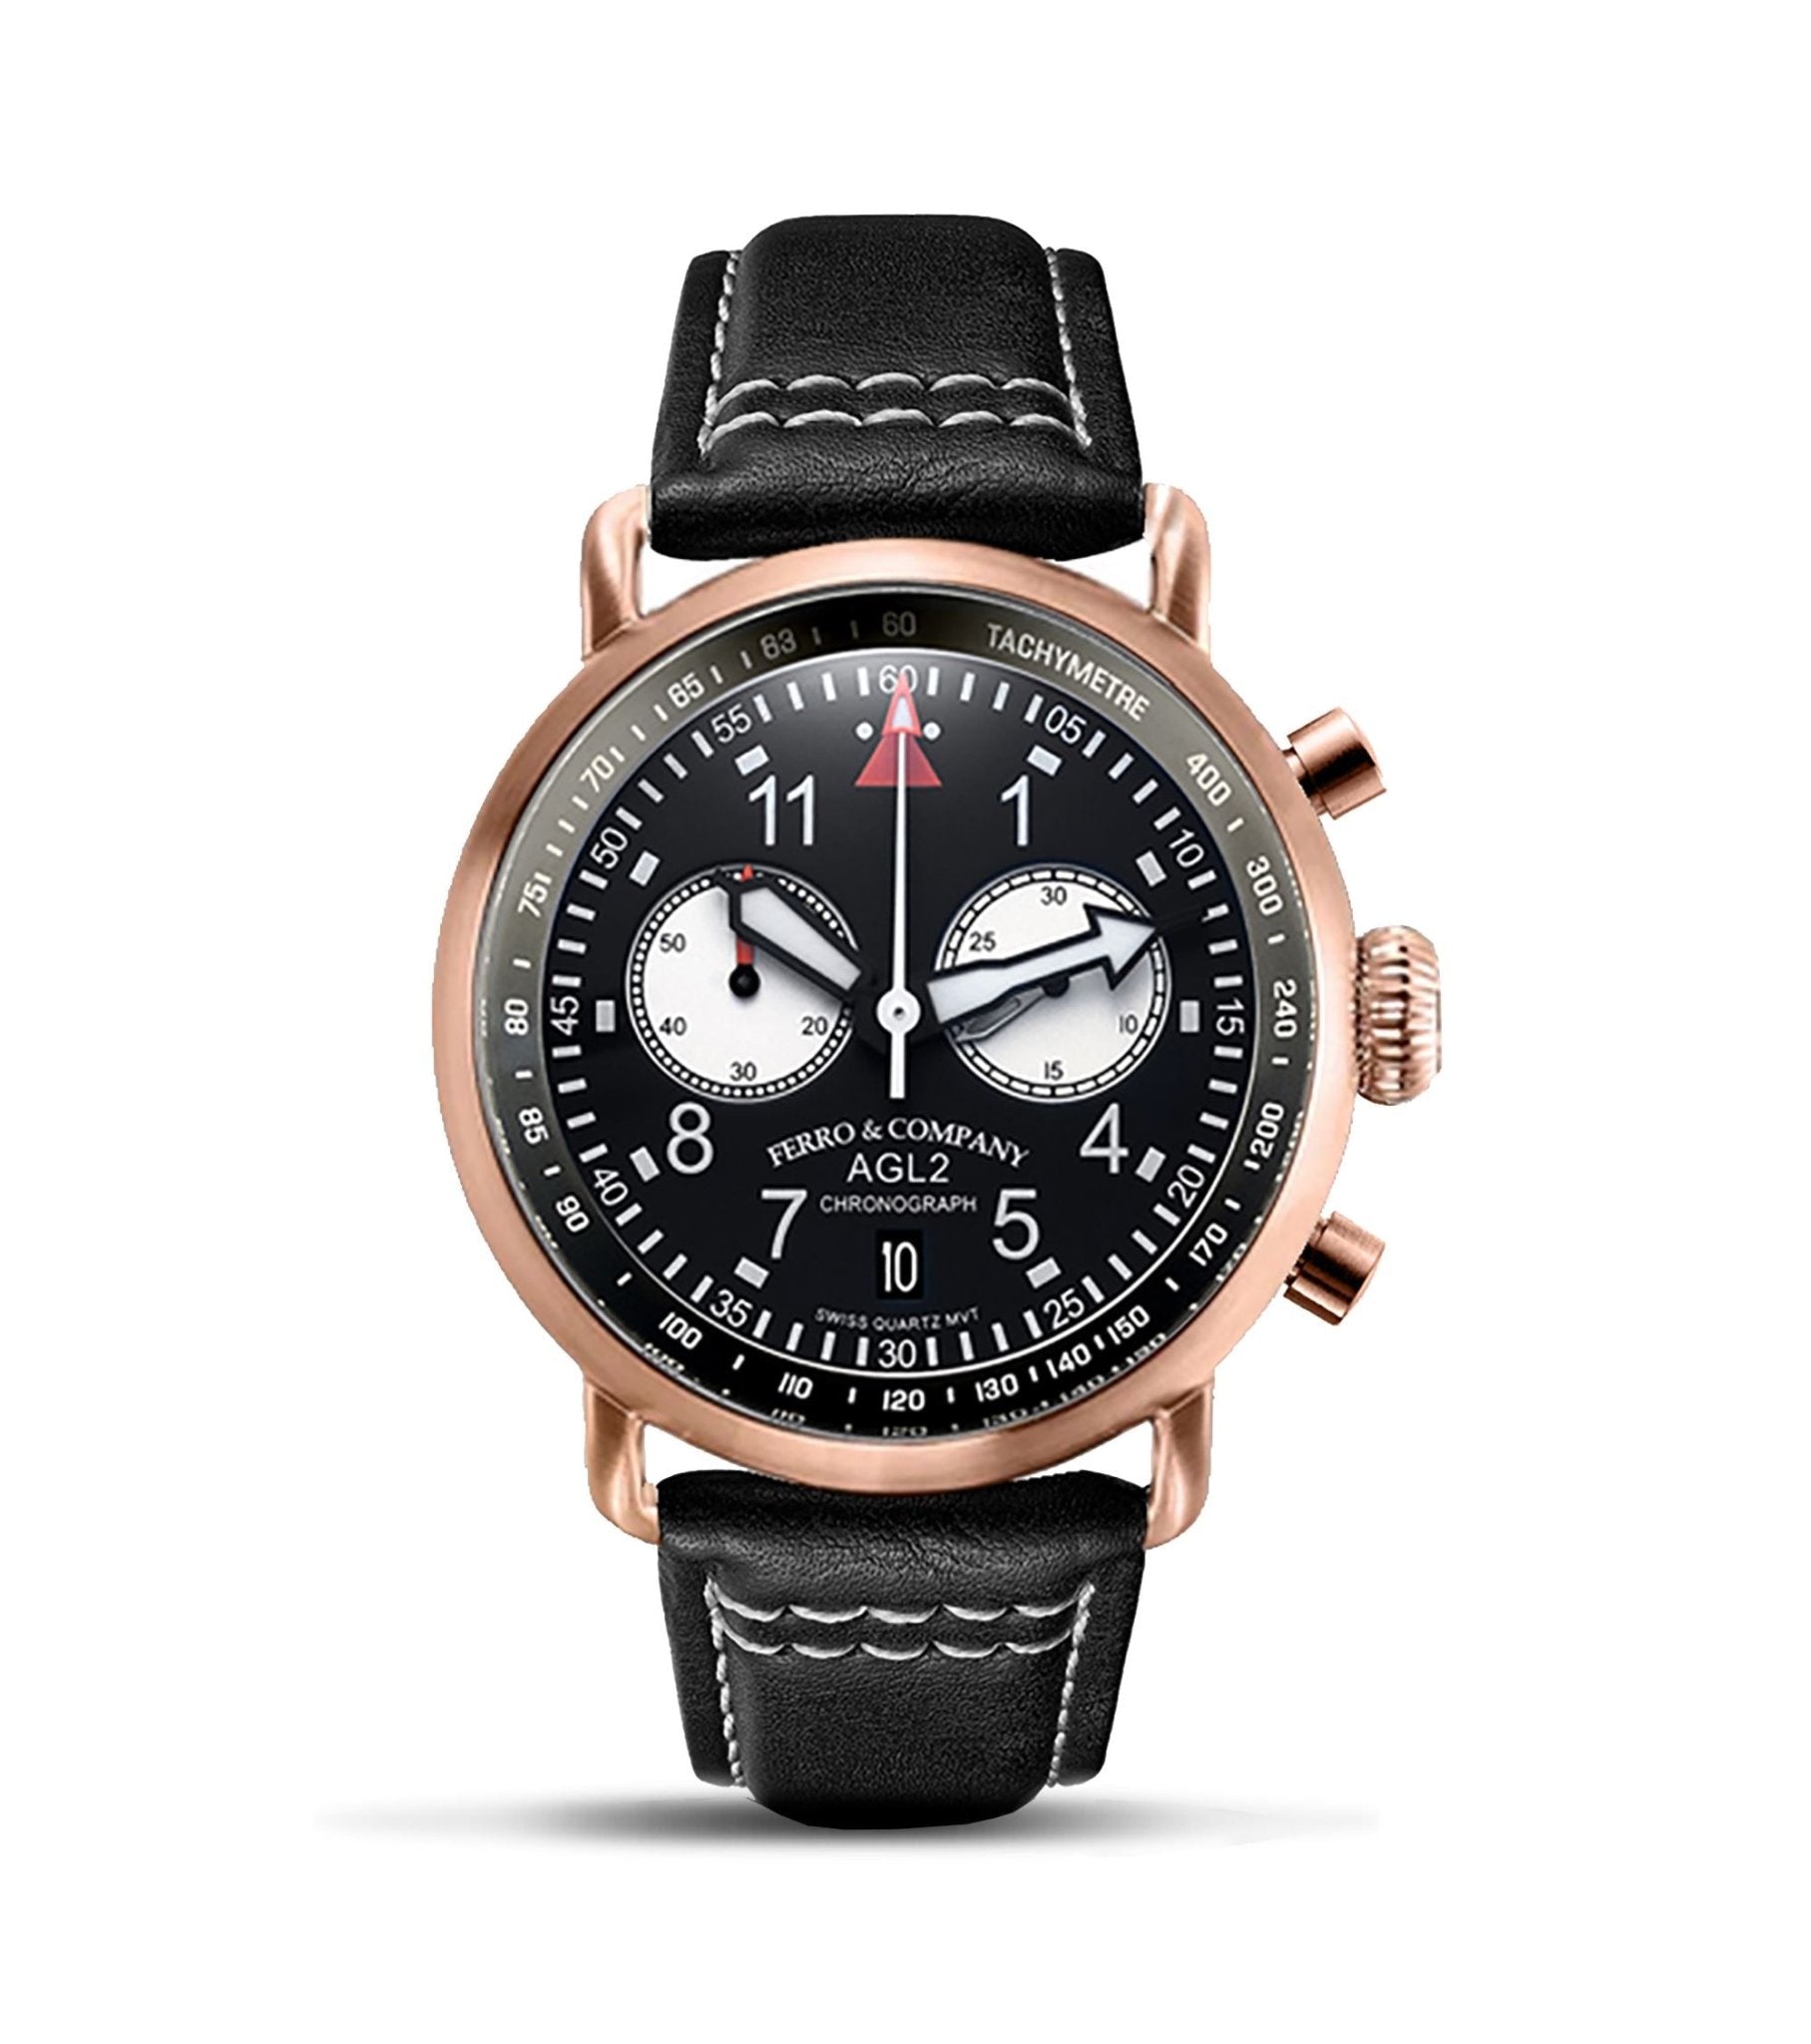 Ferro Watches AGL 2 Vintage style Pilot Watch Chronograph All Black Rose Gold - Ferro &amp; Company Watches